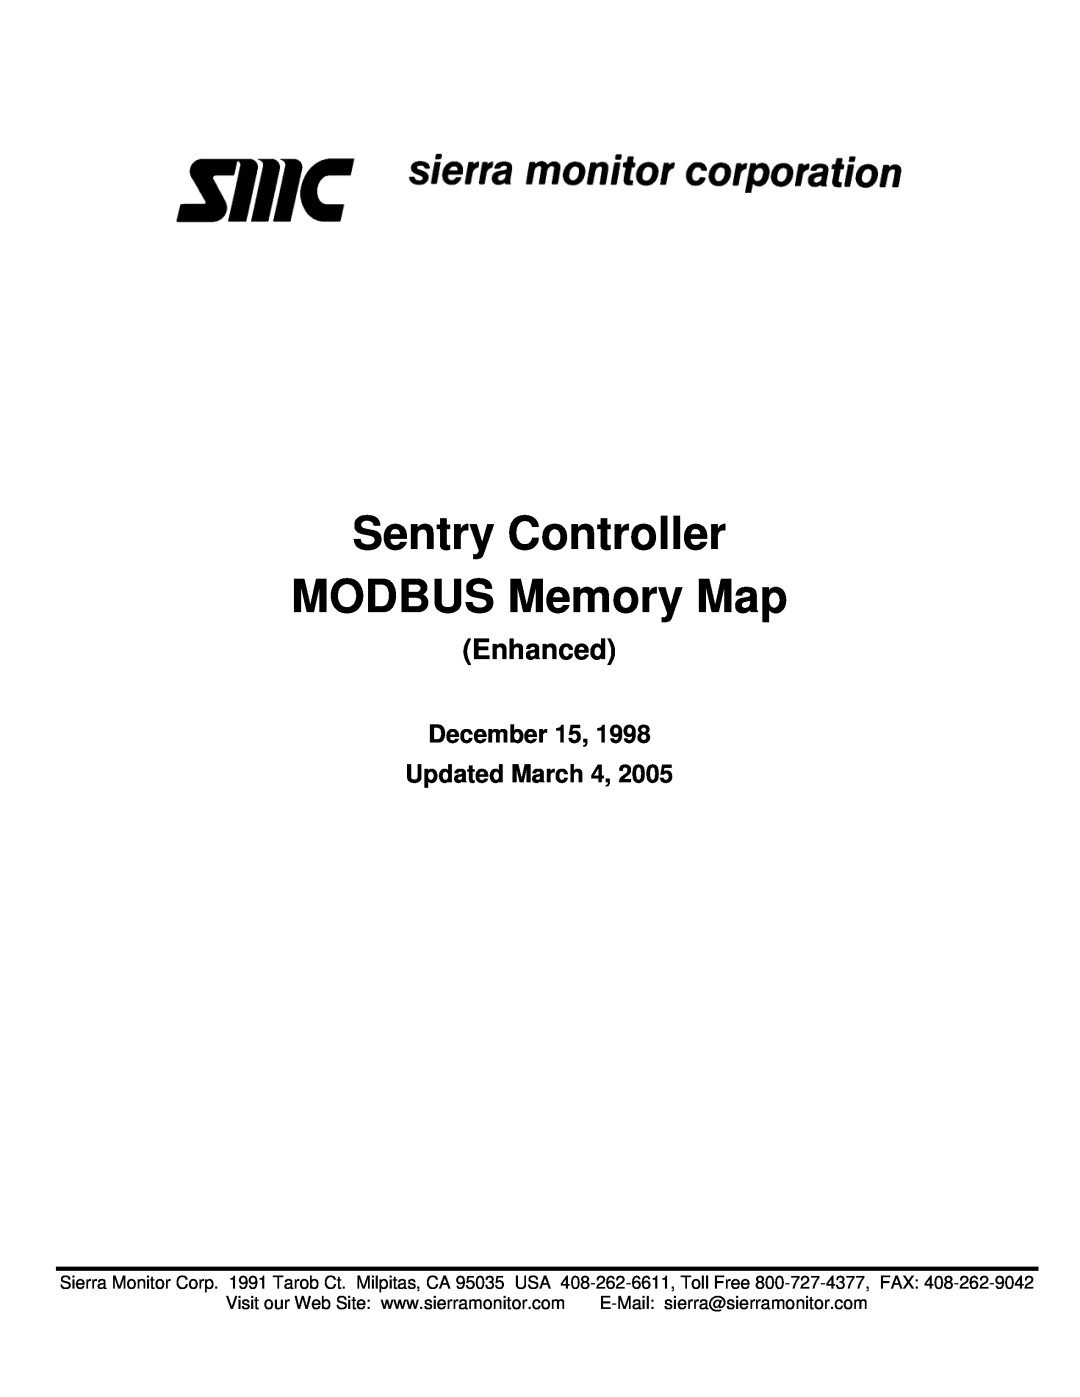 Sierra Monitor Corporation Gas Detector manual Enhanced, Sentry Controller MODBUS Memory Map, December 15, Updated March 